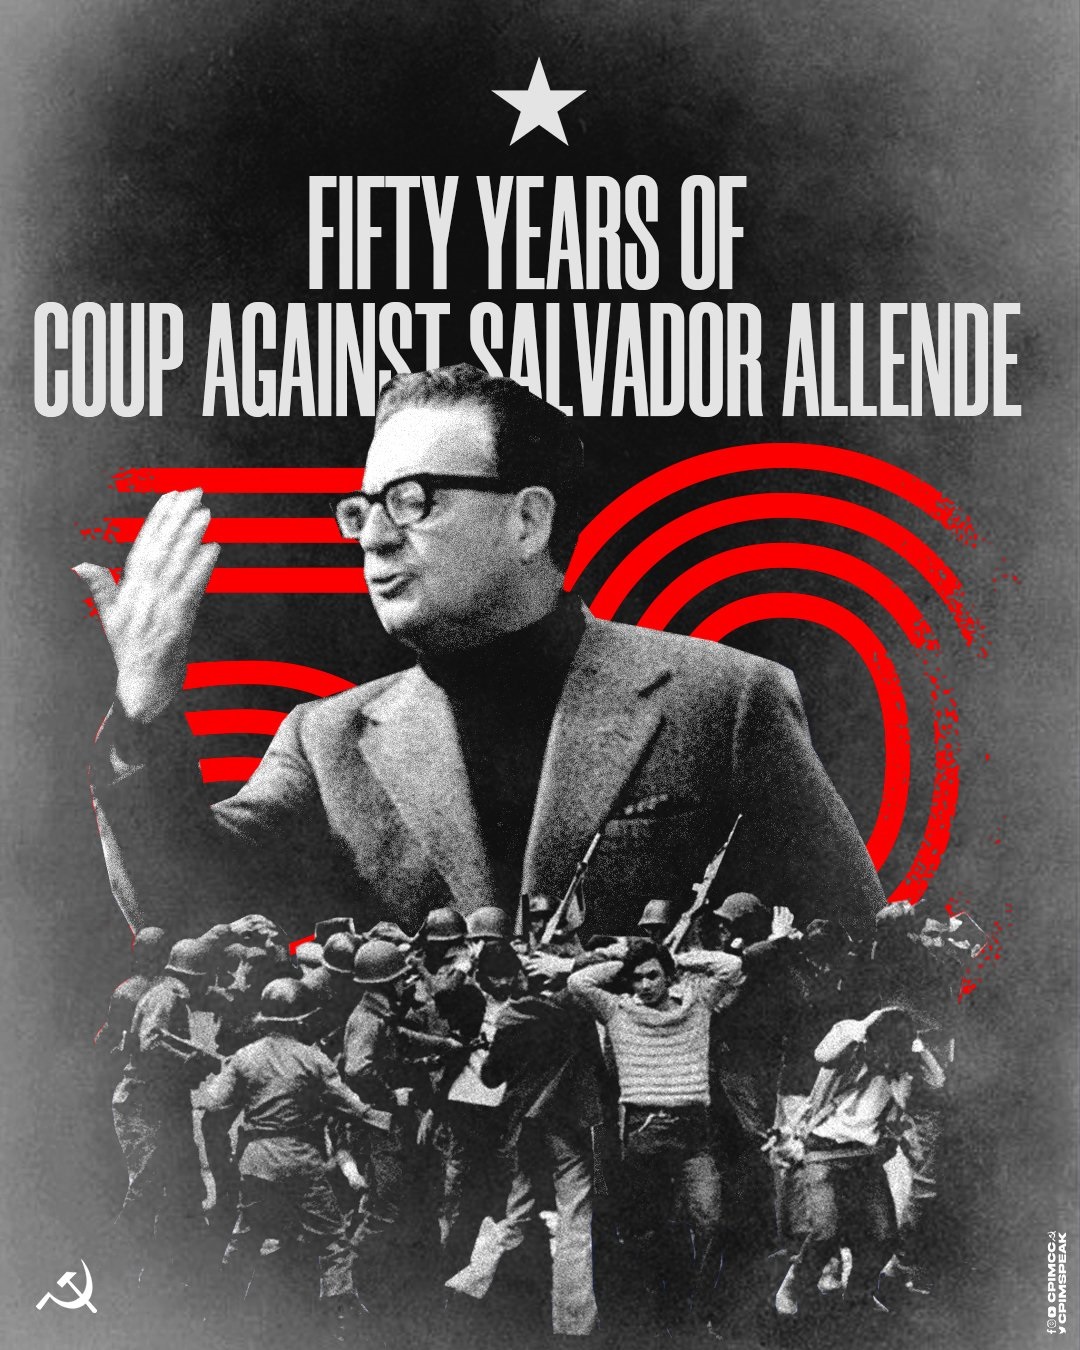 https://www.workersunity.com/wp-content/uploads/2023/09/Pinochet-in-Chile-and-death-of-allende.jpg